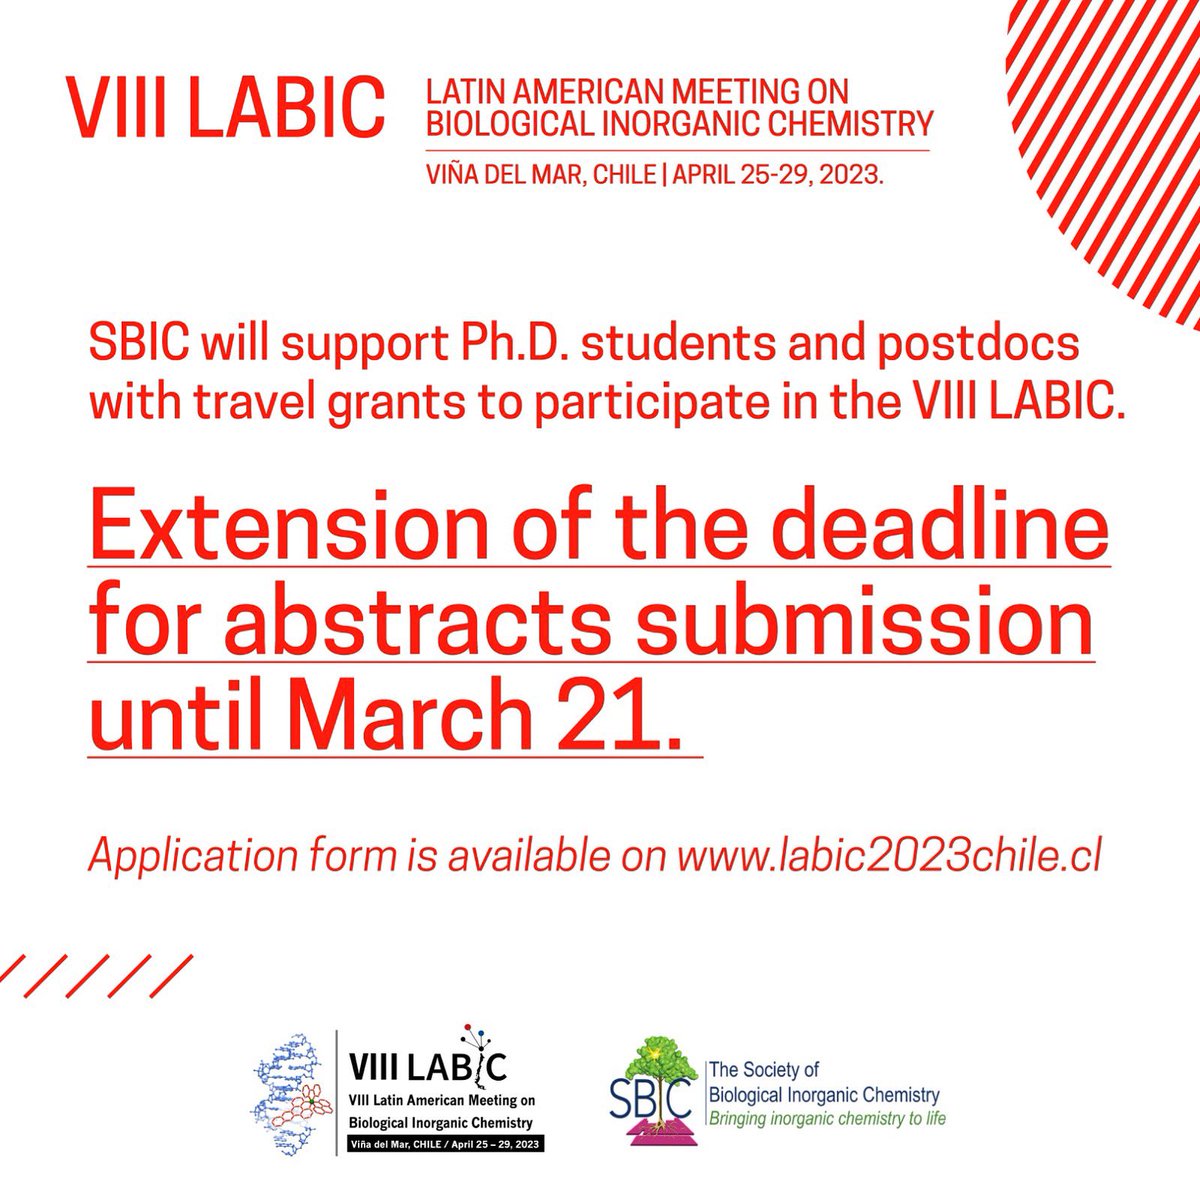 We are pleased to inform that SBIC will support Ph.D. students and postdocs with travel grants to participate in the VIII LABIC👏🏽🎉We are extending the deadline for abstract submission until March 21🗓️! Application form is available on the web! Thanks @SBICofficial 👏🏽👏🏽